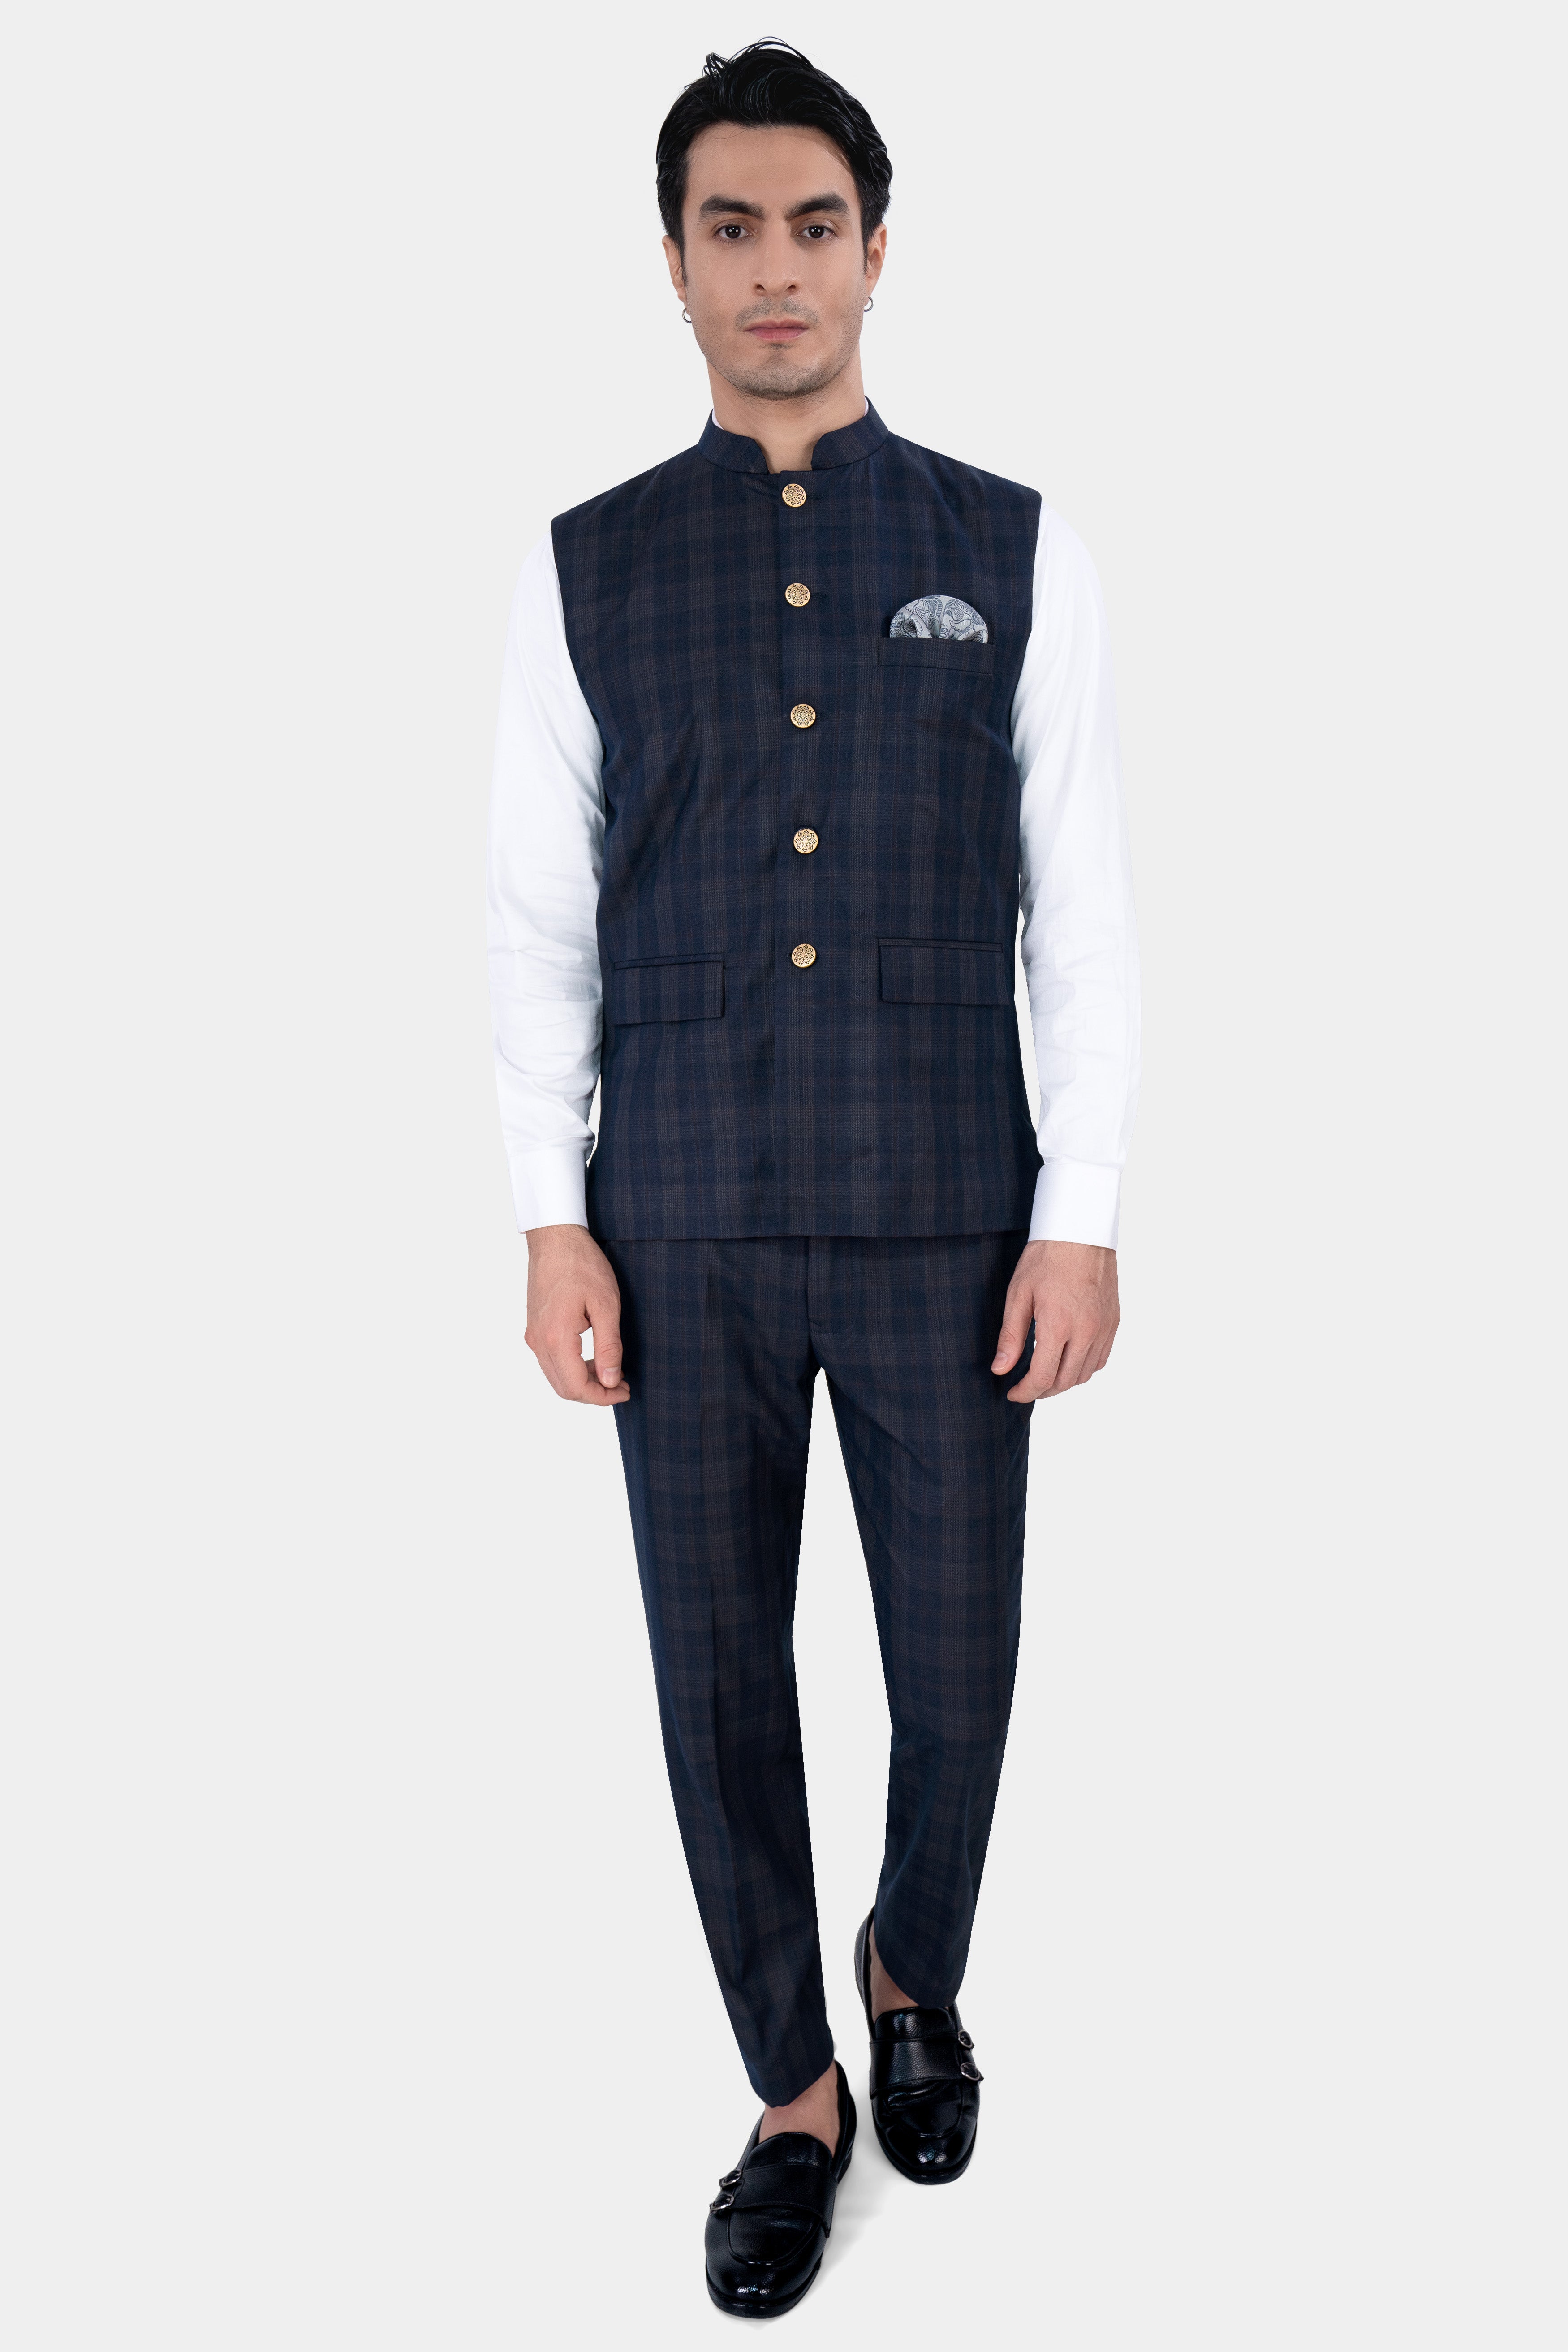 Admiral Blue and Cinereous Brown Plaid Wool Rich  Nehru Jacket WC2872-36, WC2872-38, WC2872-40, WC2872-42, WC2872-44, WC2872-46, WC2872-48, WC2872-50, WC2872-52, WC2872-54, WC2872-56, WC2872-58, WC2872-60